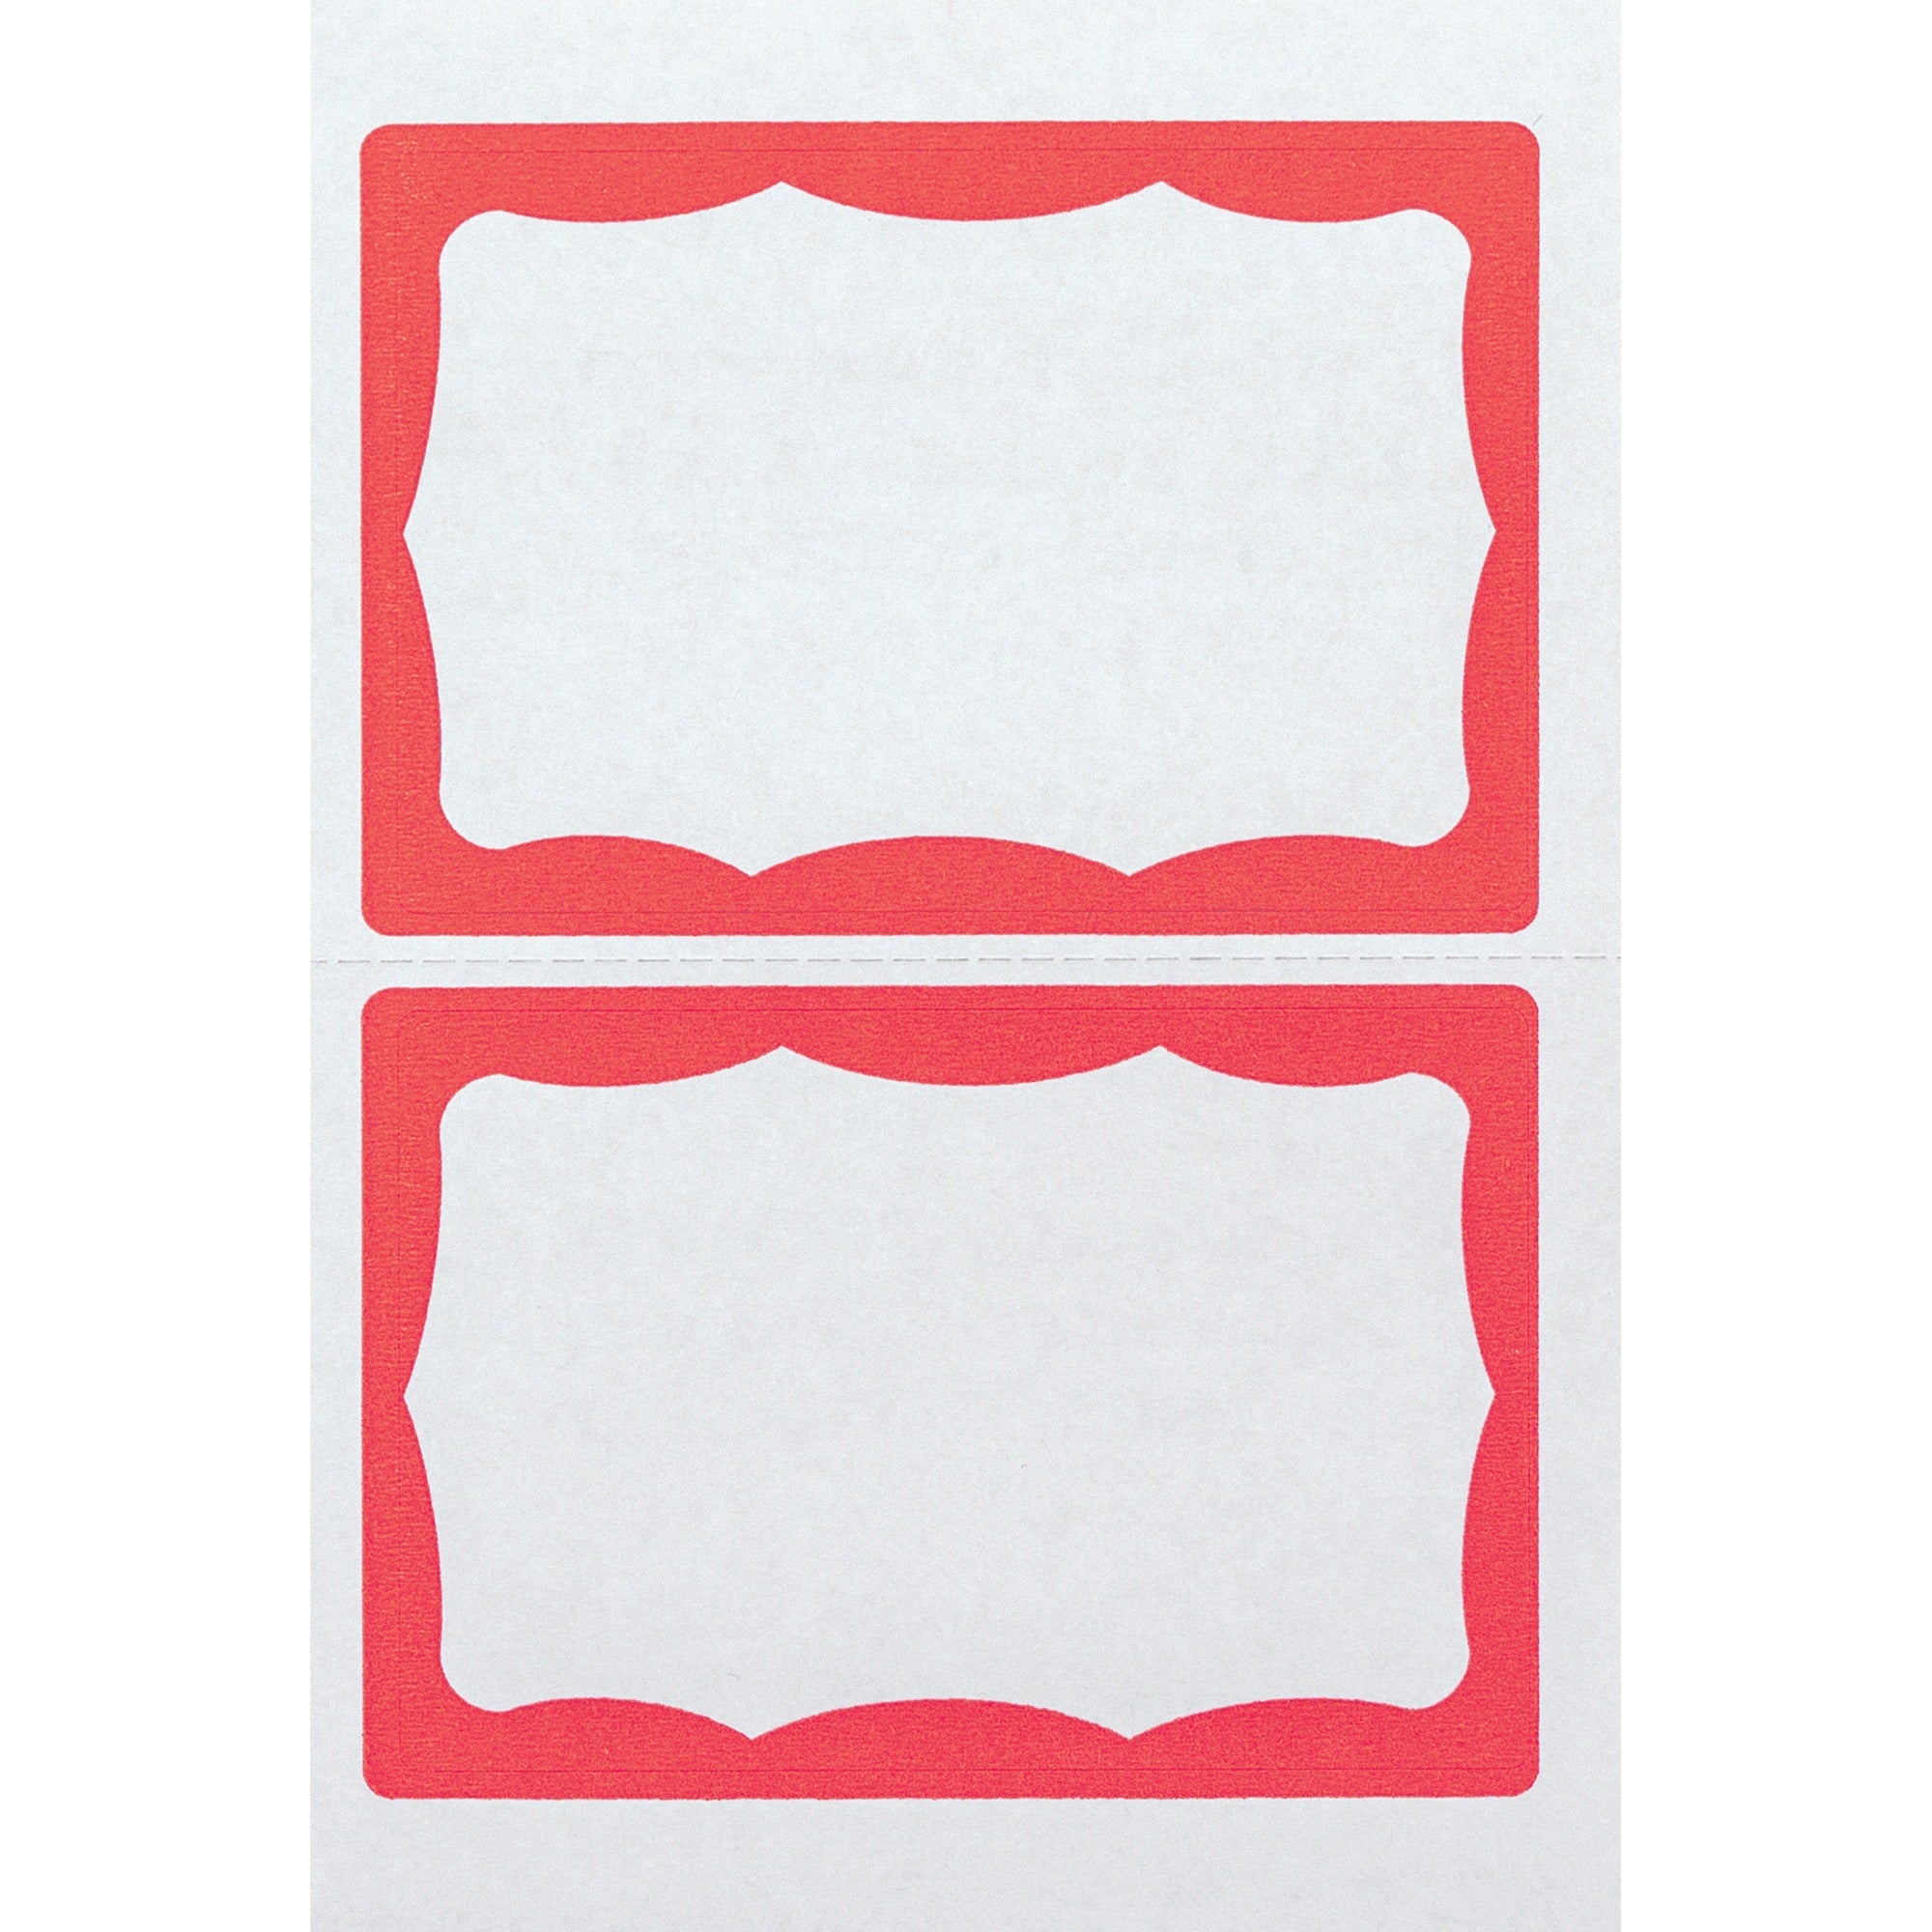 advantus-color-border-adhesive-name-badges-2-5-8-height-x-3-3-4-width-removable-adhesive-rectangle-white-red-100-box_avt97189 - 1